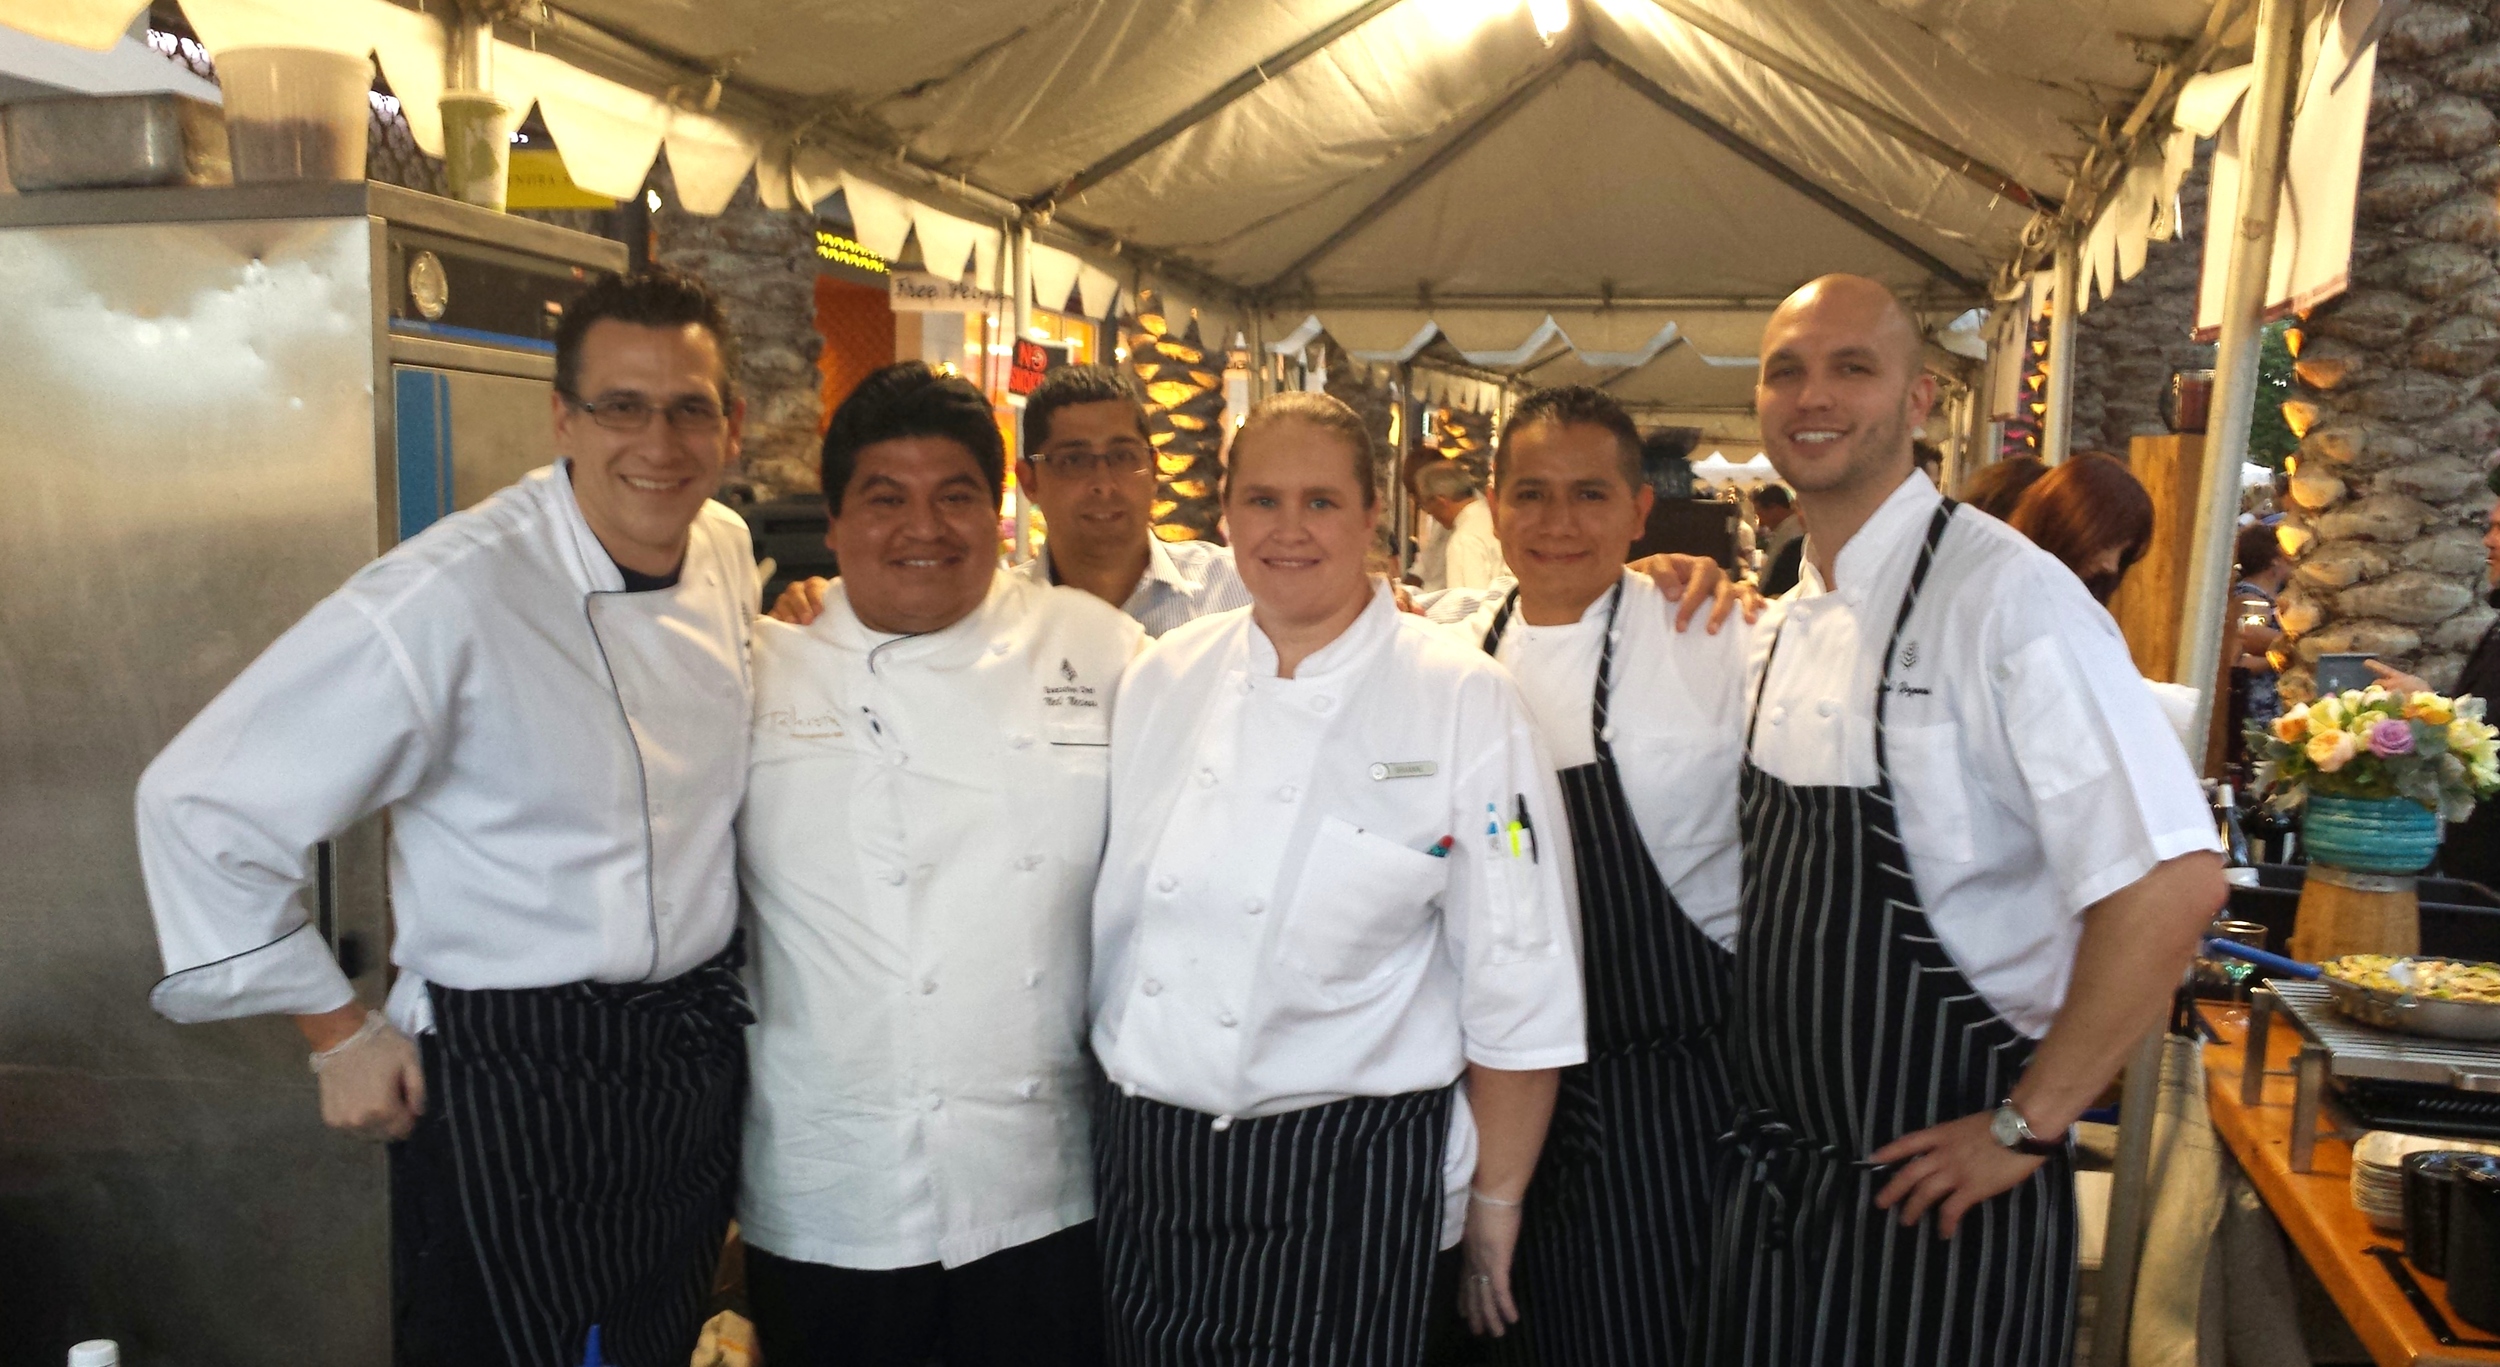 Chef Mecinas and the Four Seasons crew